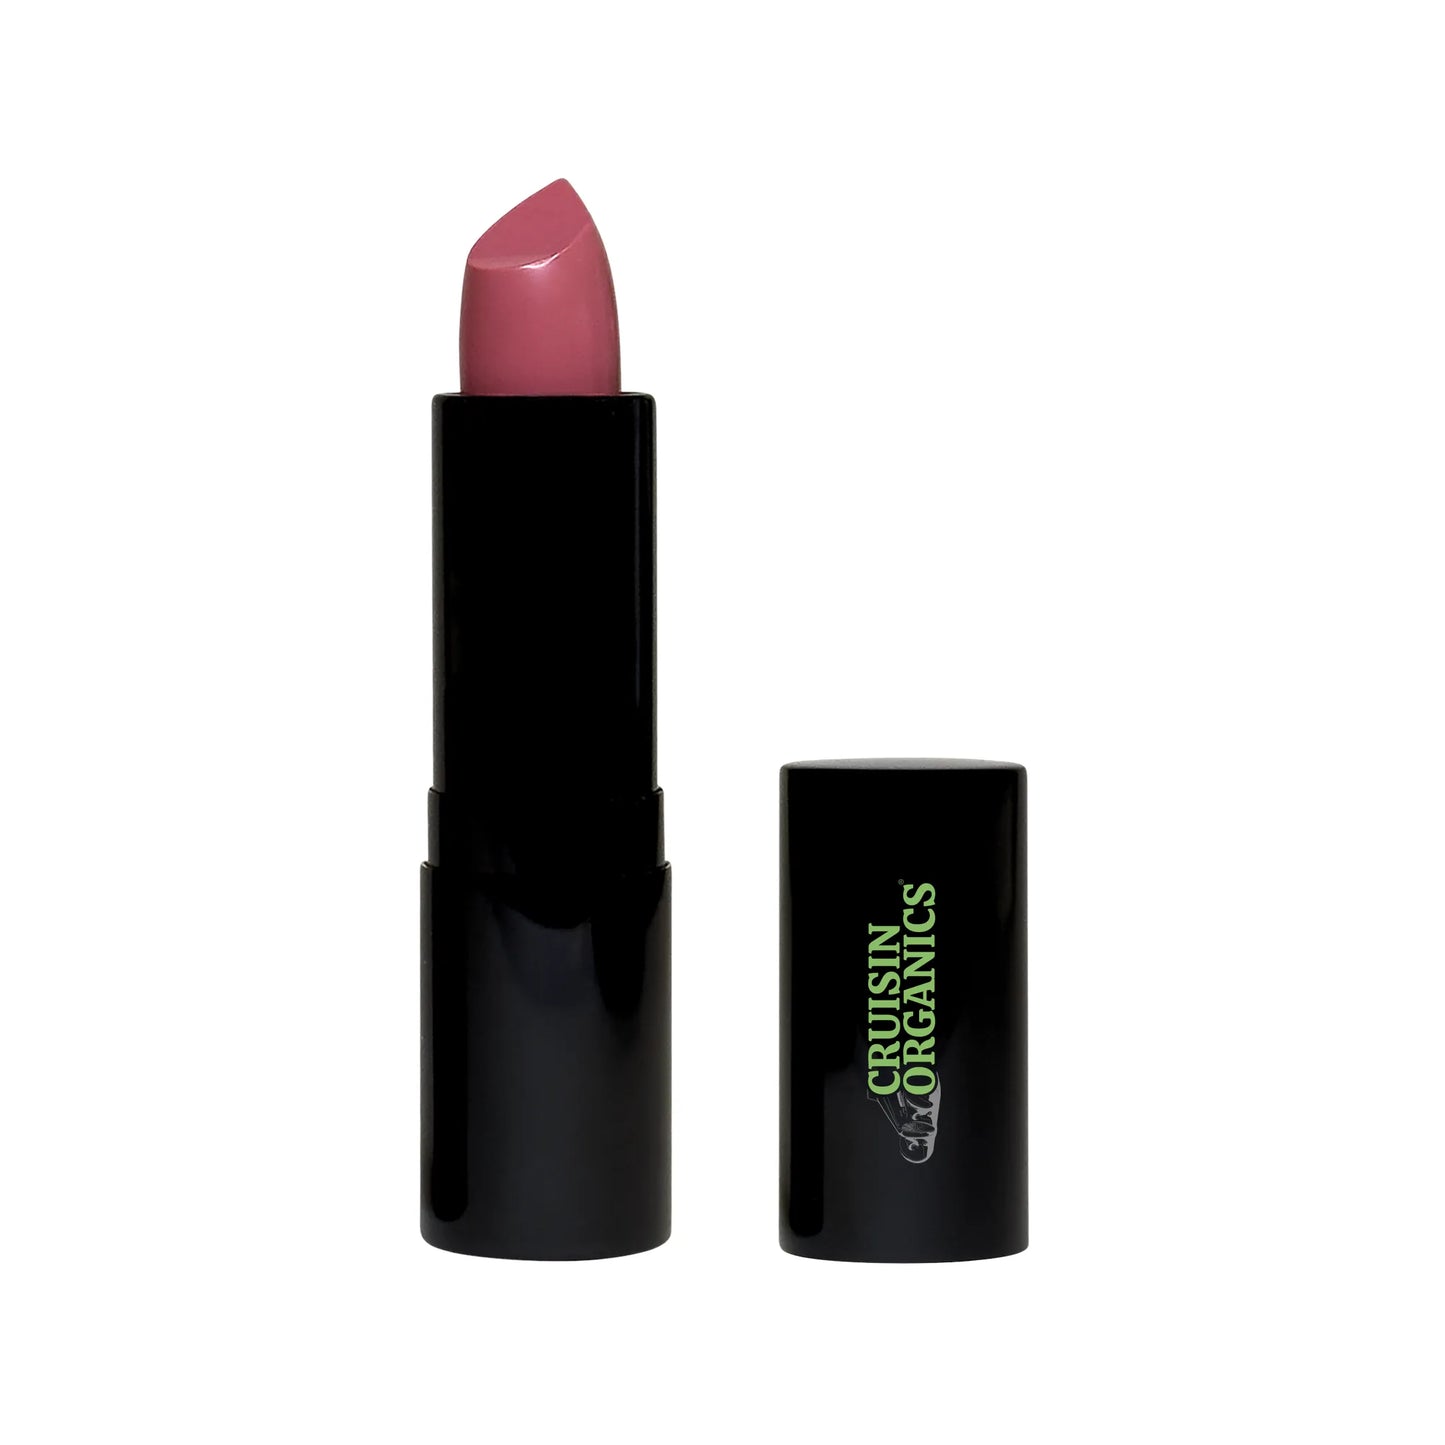 Indulge in luxury with Cruisin Organics Magical Mauve Cream Lipstick. Infused with Murumuru oil and a blend of nourishing oils and butters, including Mango and Shea, this lipstick not only adds a pop of color but also rejuvenates, hydrates, and adds volume to your lips. Elevate your lip play with this premium product.